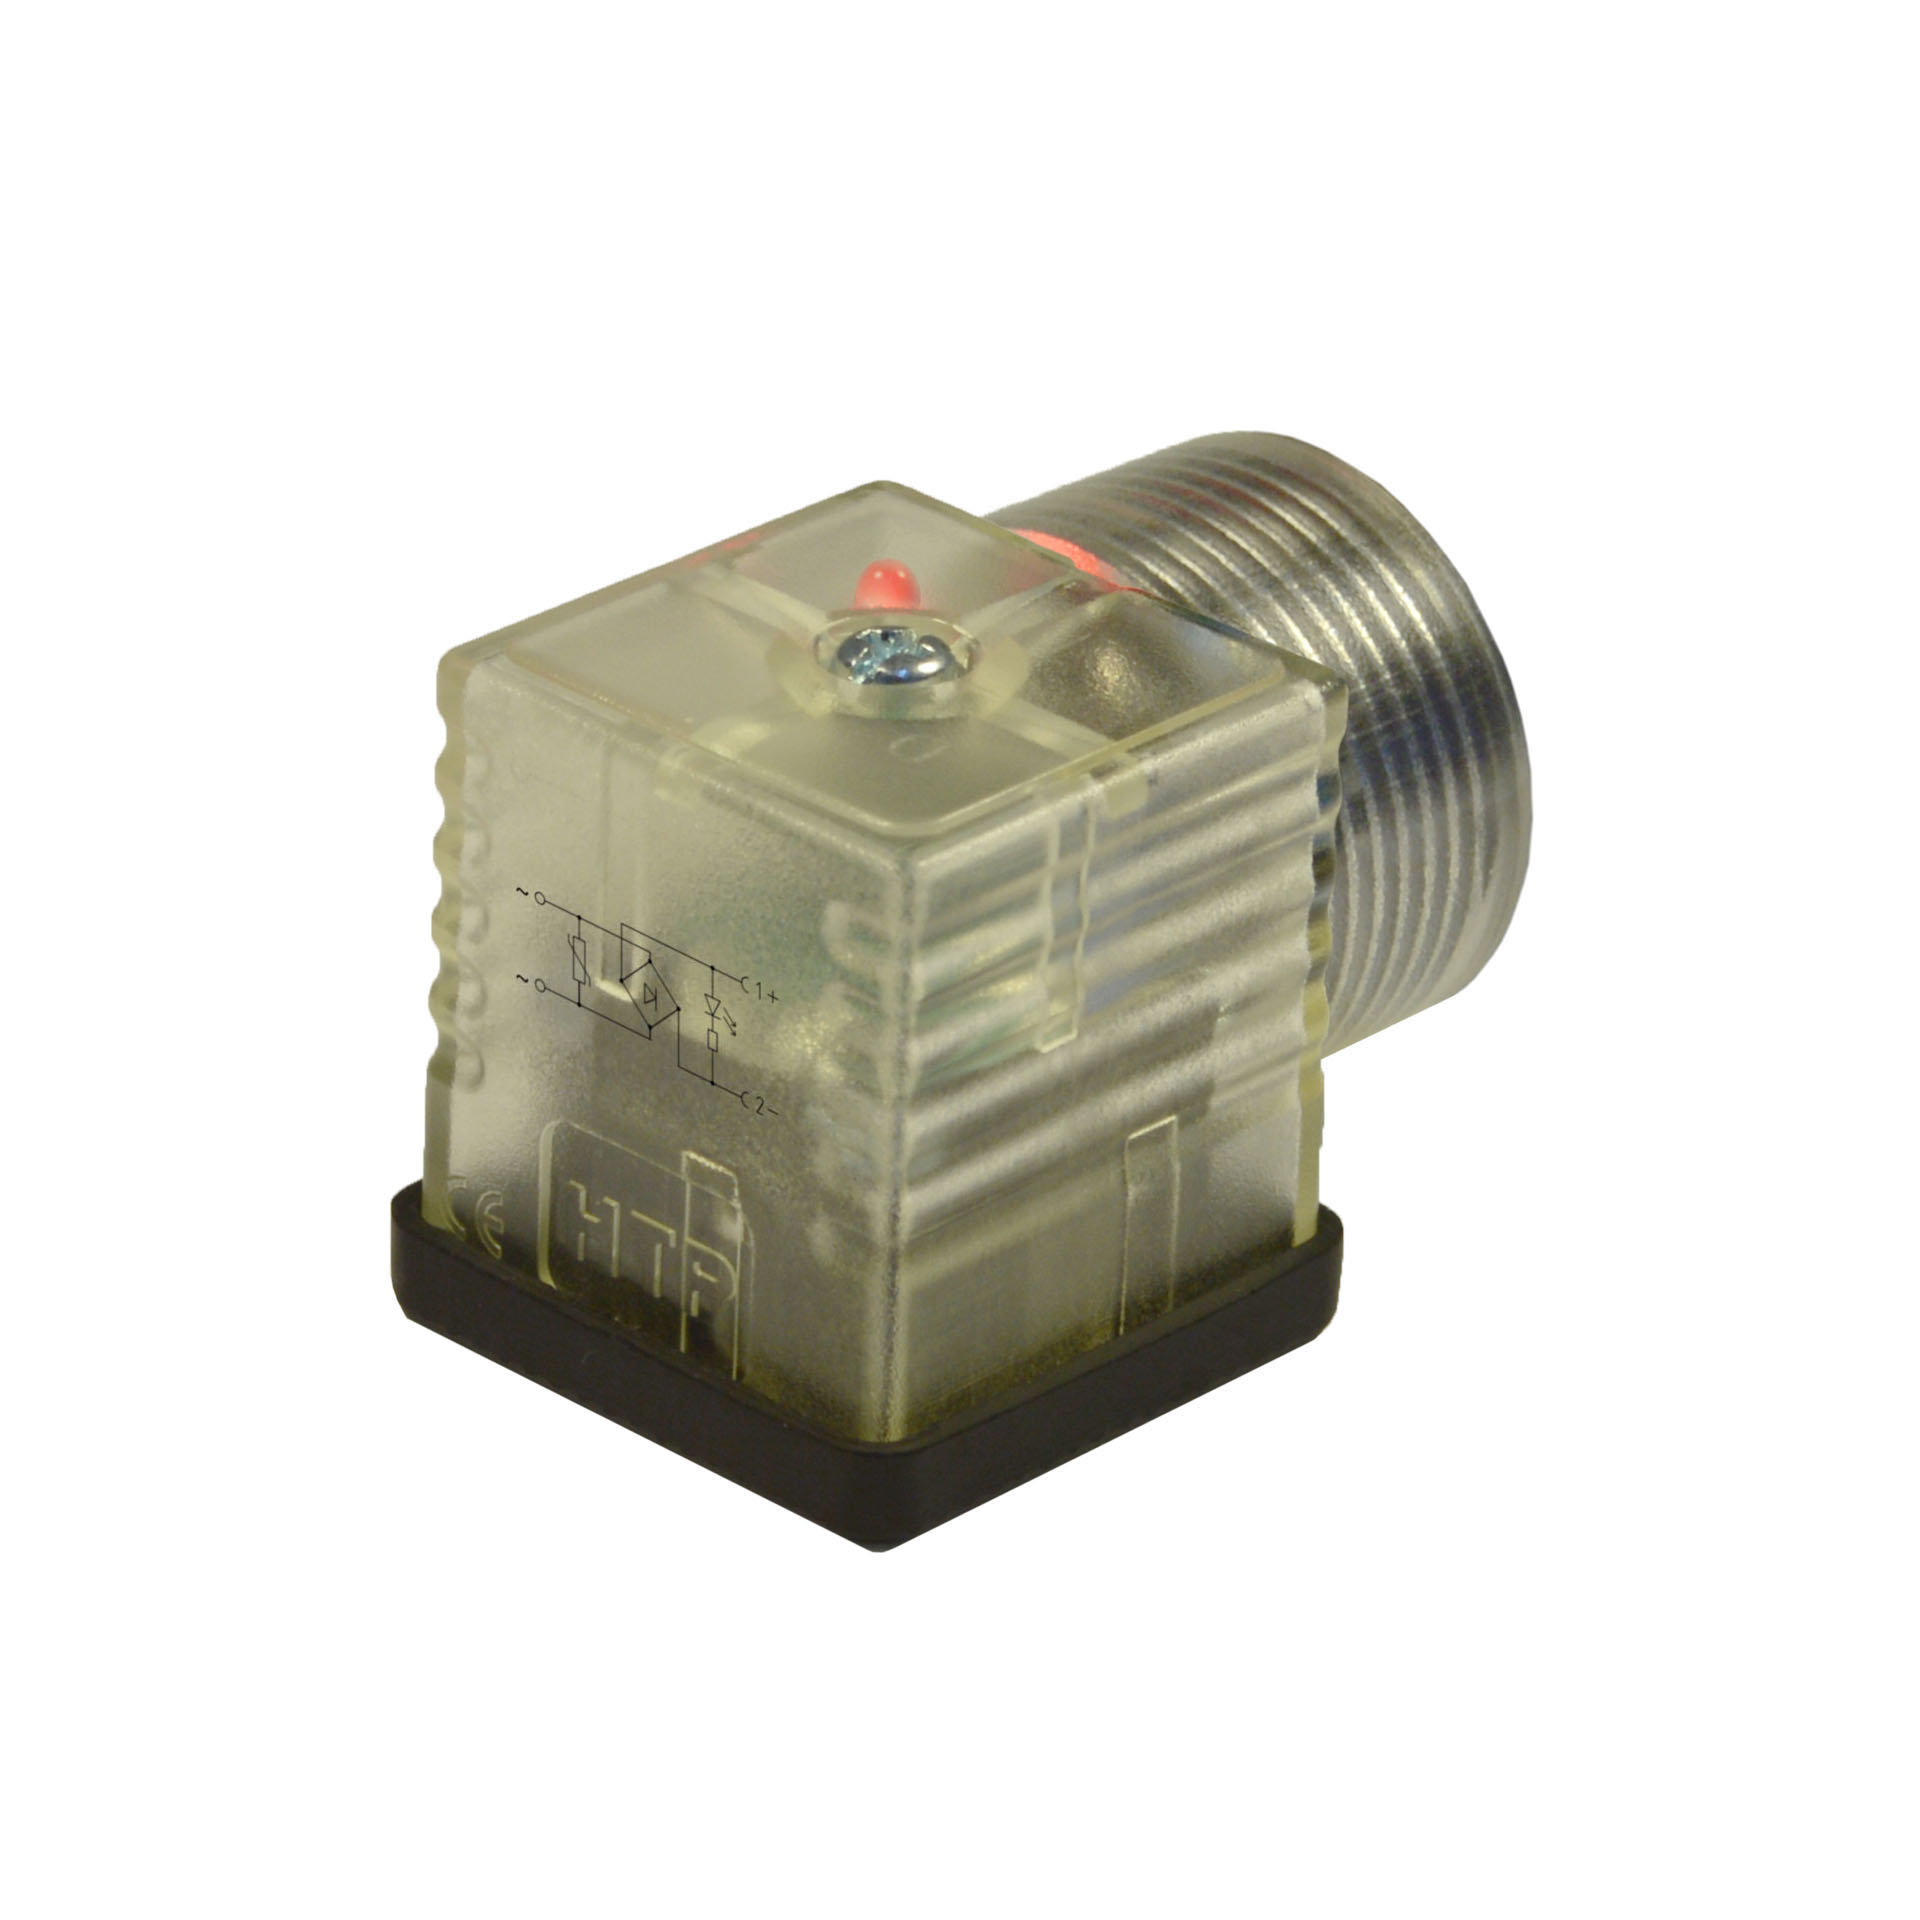 EN175301-803(typeA)field attachable,2p+PE(h.12),Red LED+vdr+rectifier,230VAC,1/2"NPTF